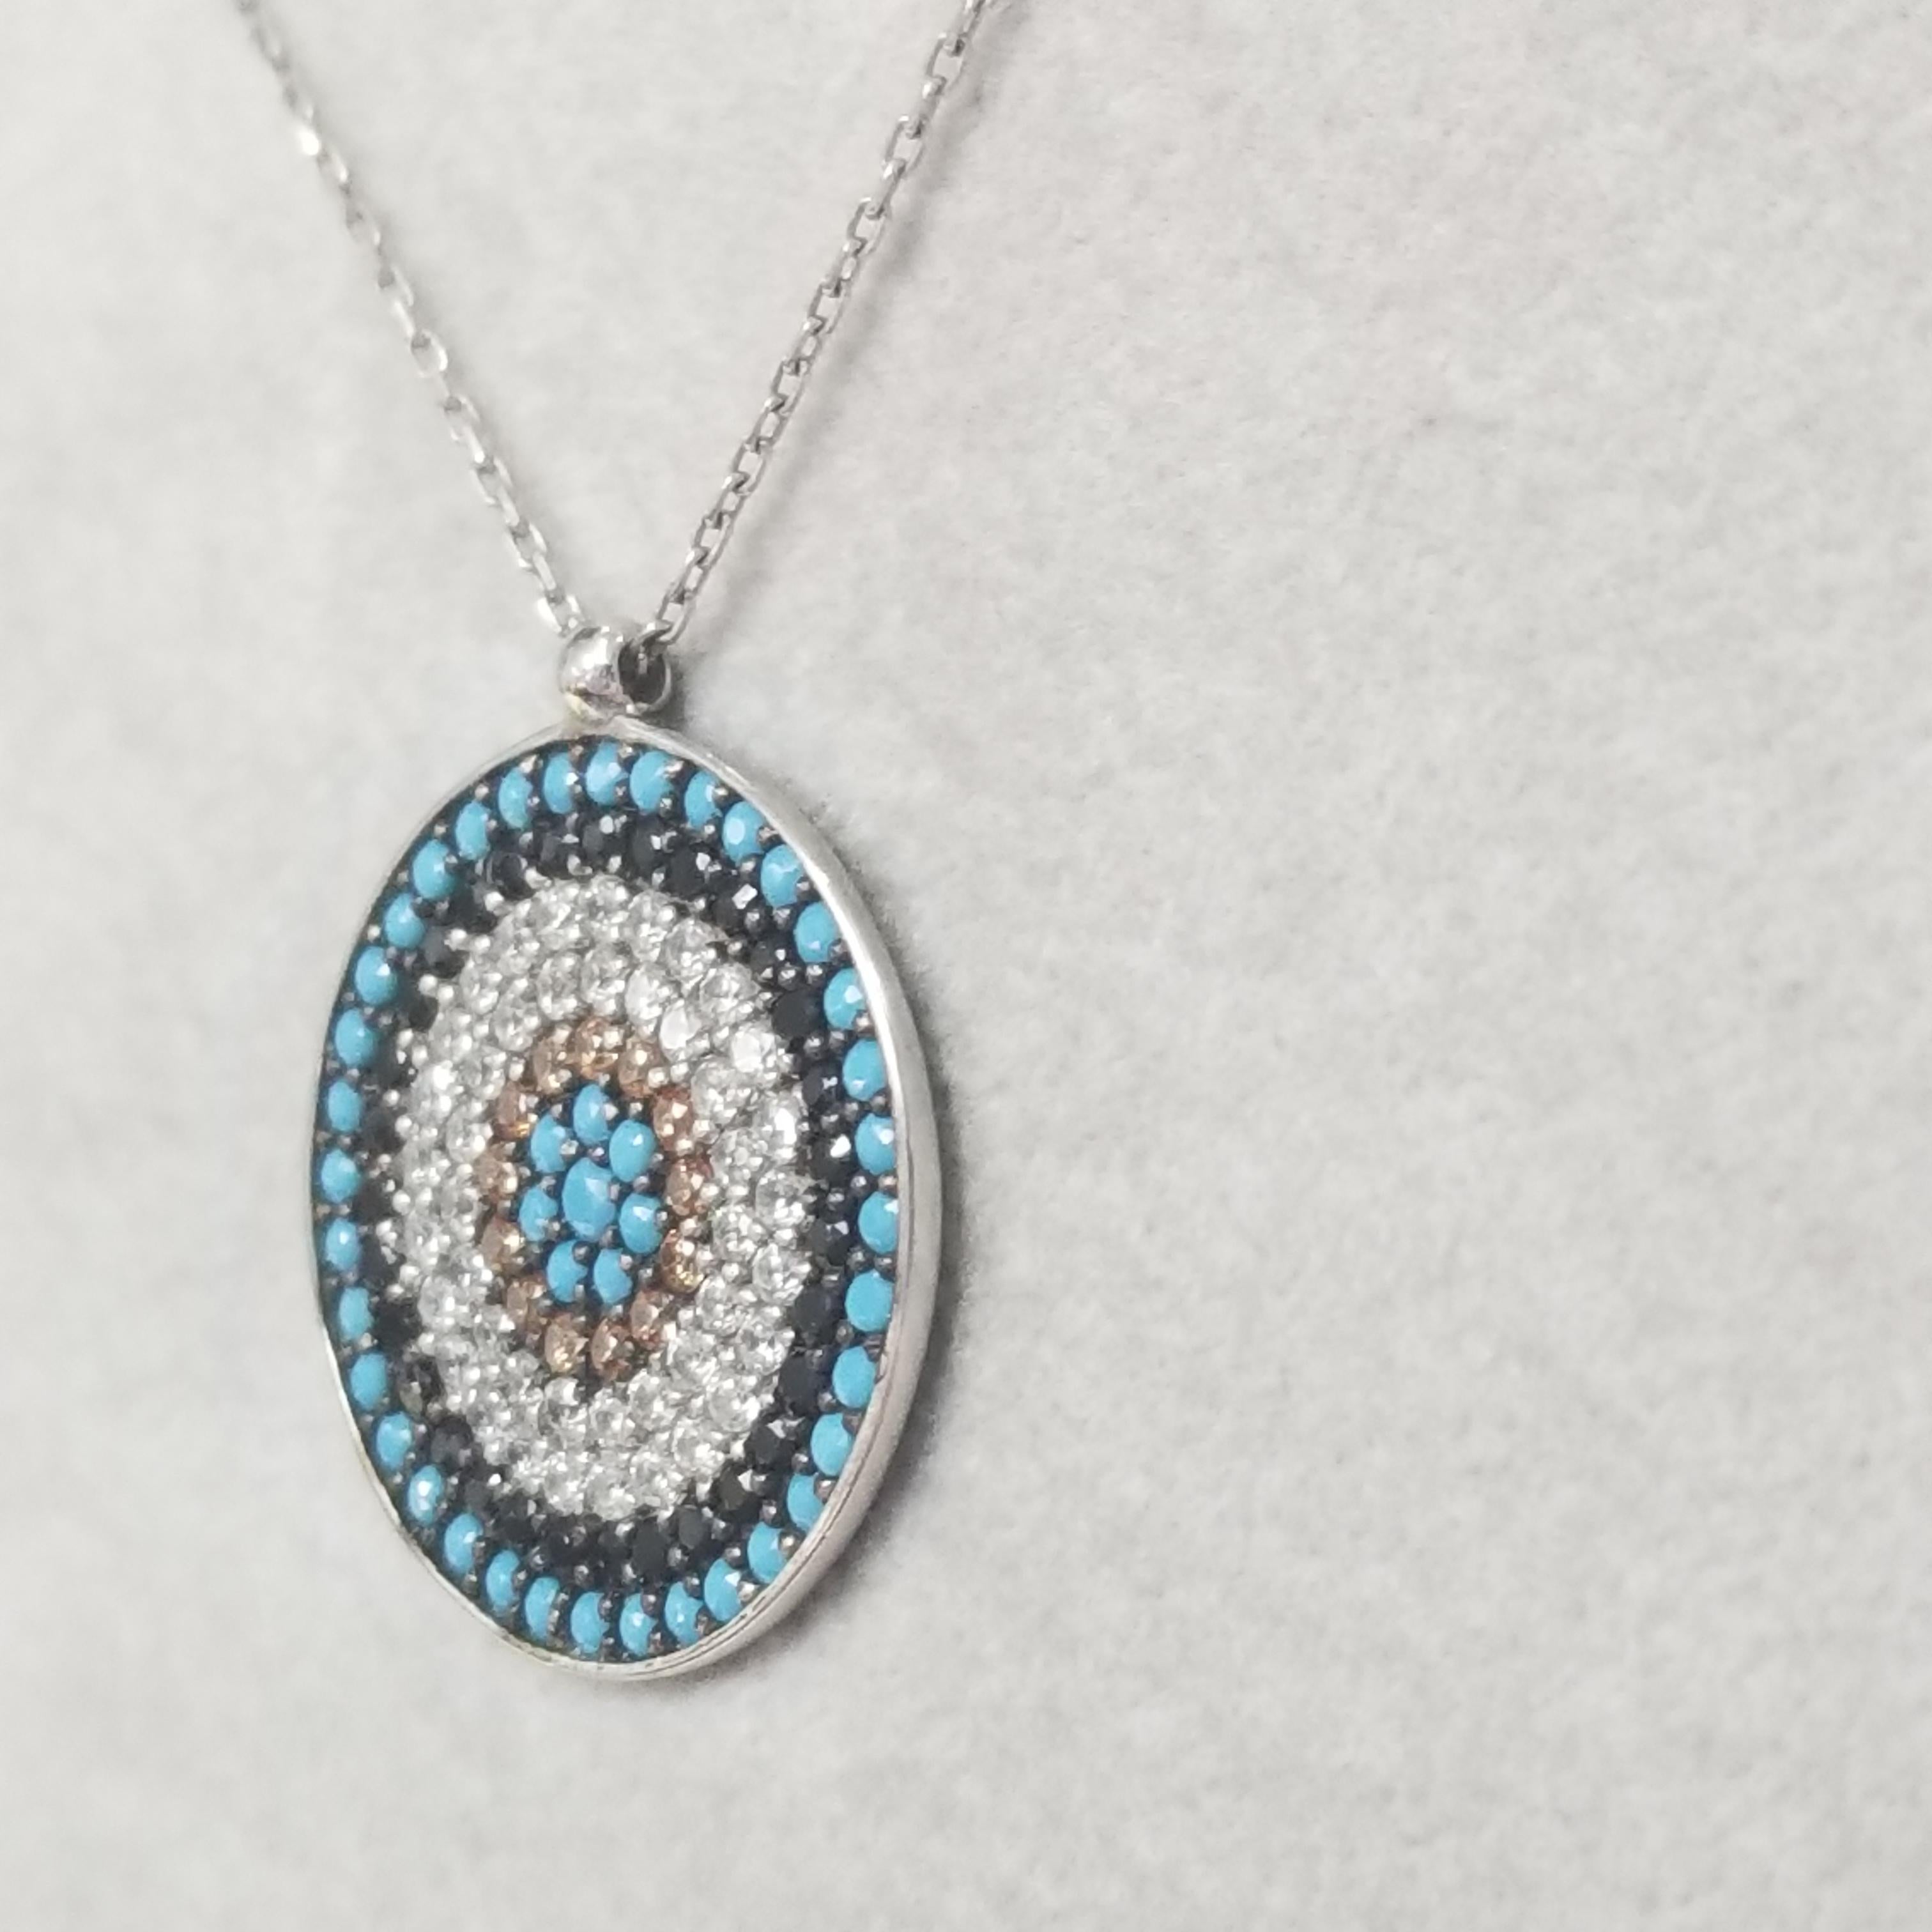 Modern Sterling Silver Pendant with Turquoise and Cubic